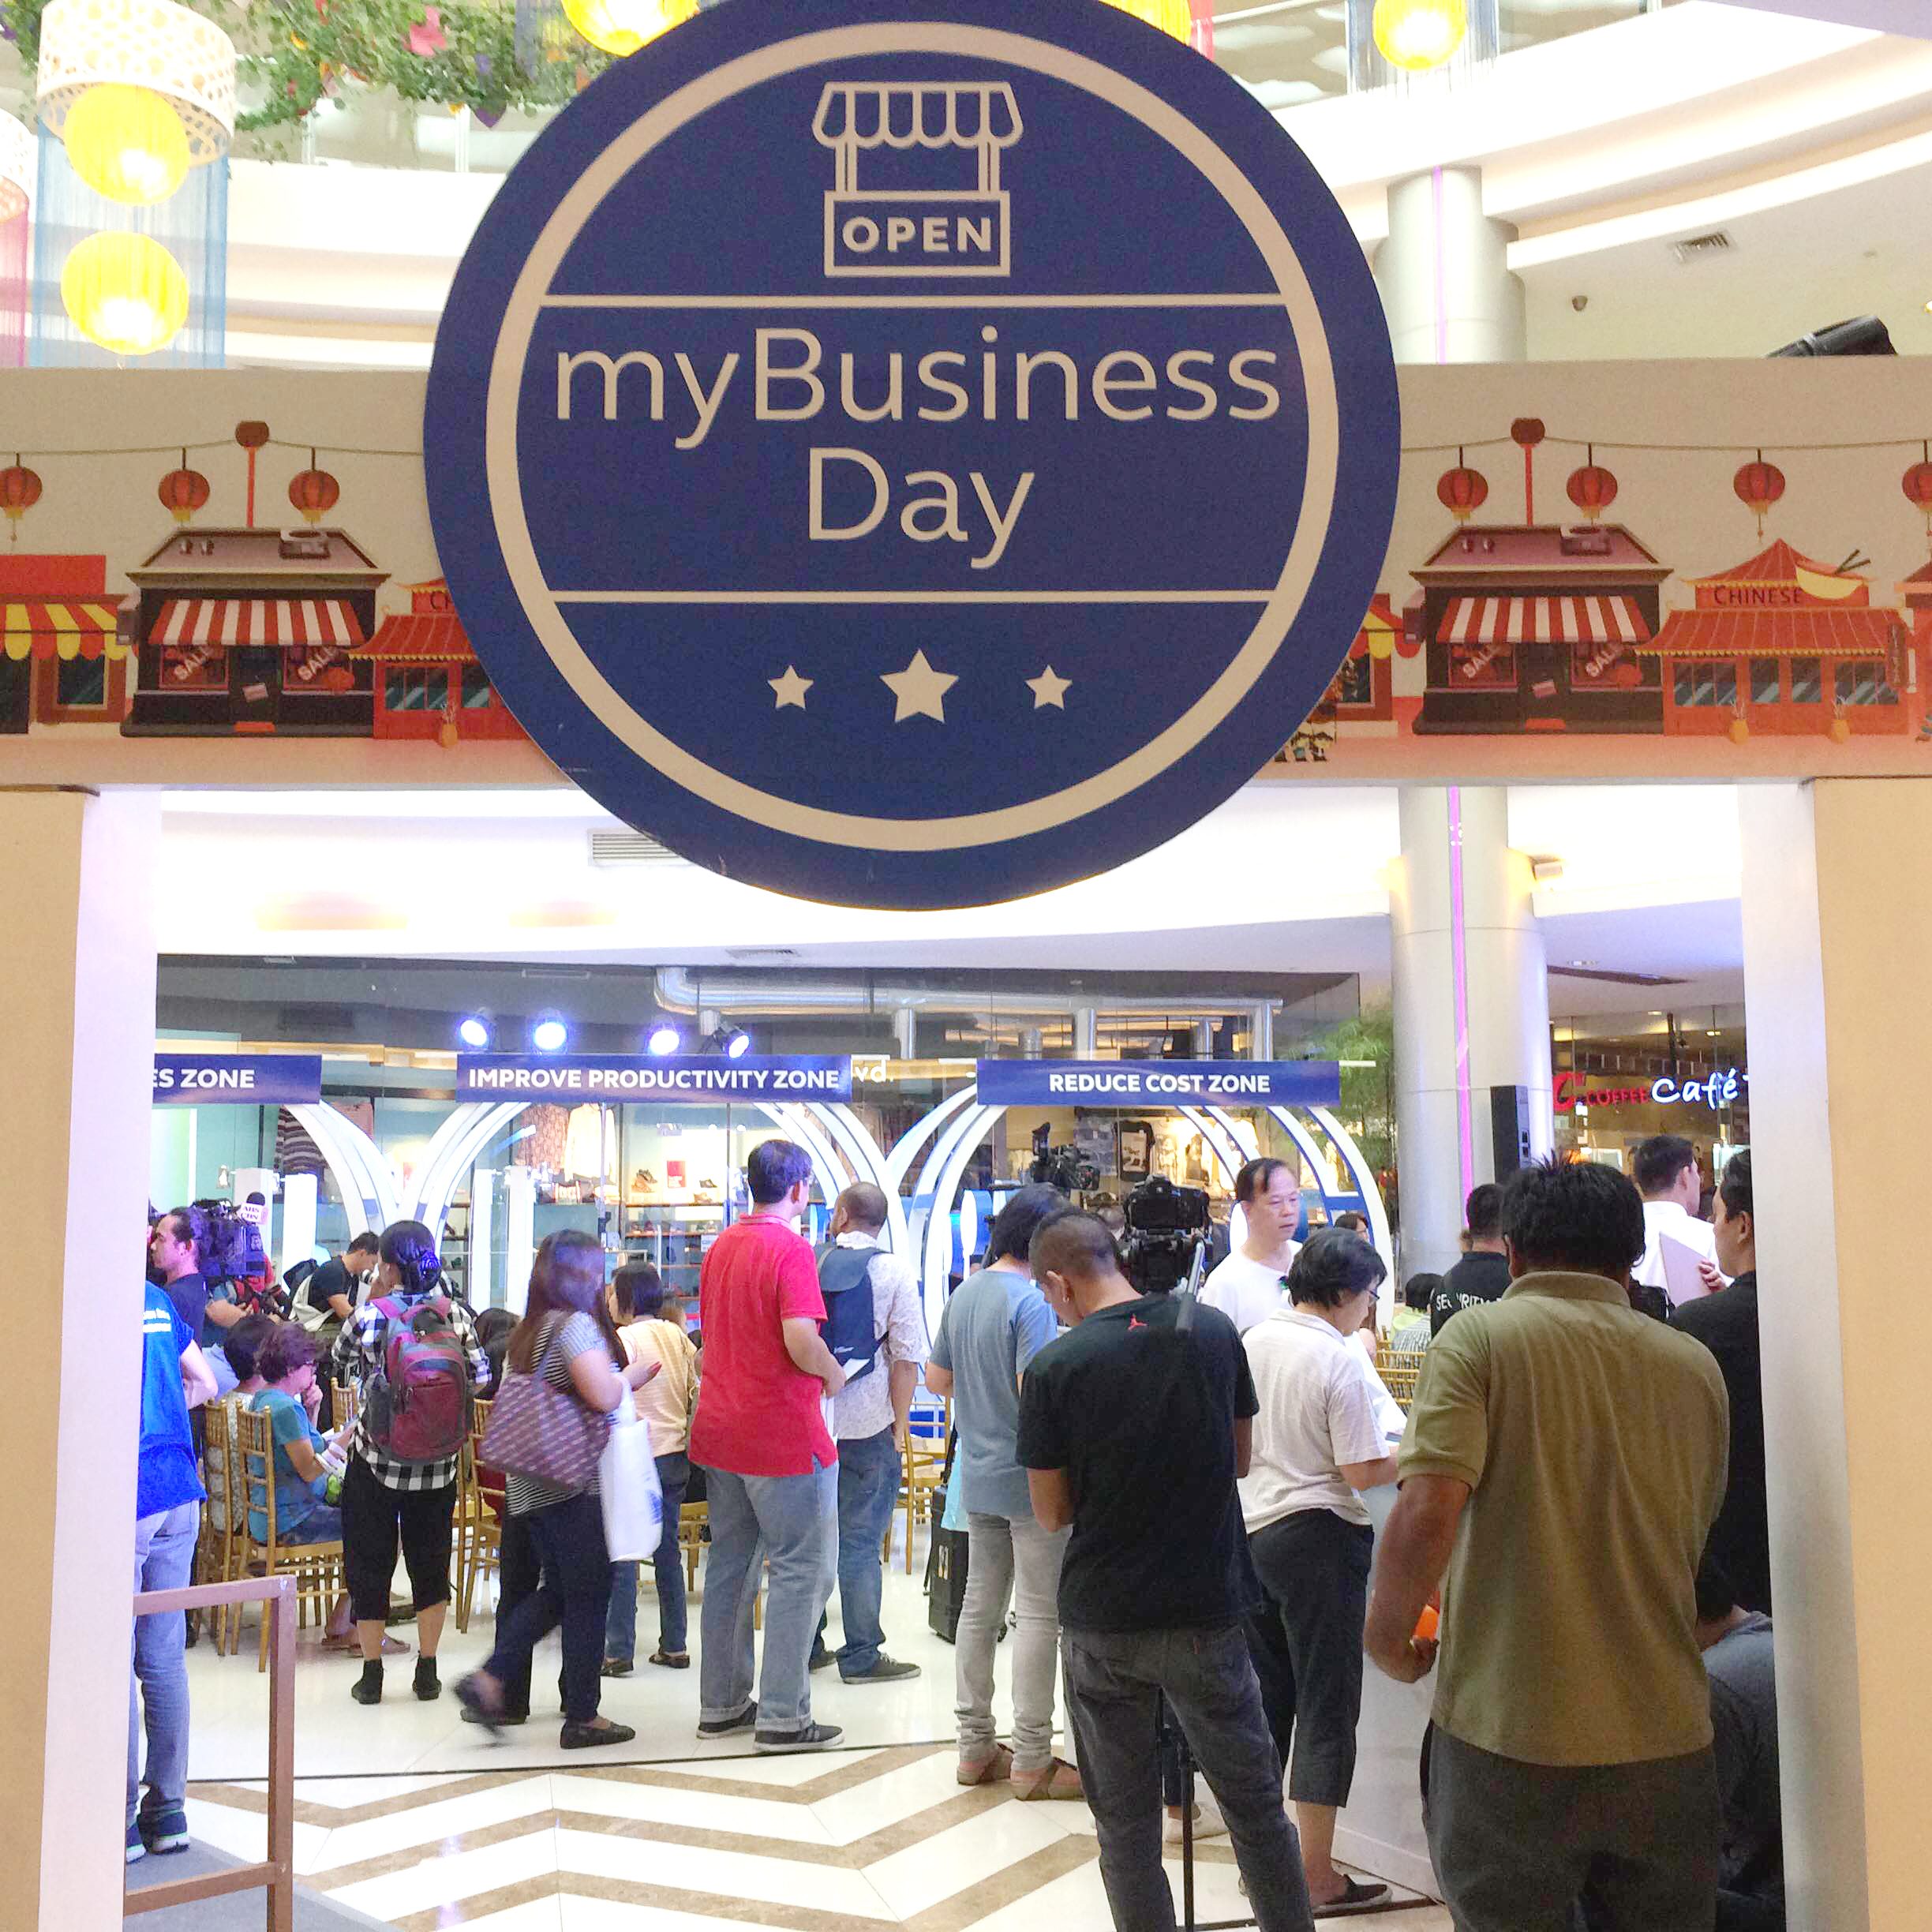 SME FAIR. As part of the myBusiness day event, Globe also rolled out its 4th Digital solutions caravan: A one-stop exhibit that allows SMEs to explore business opportunities, discover new enterprise solutions, attend talks by successful entrepreneurs and connect with finance providers.  